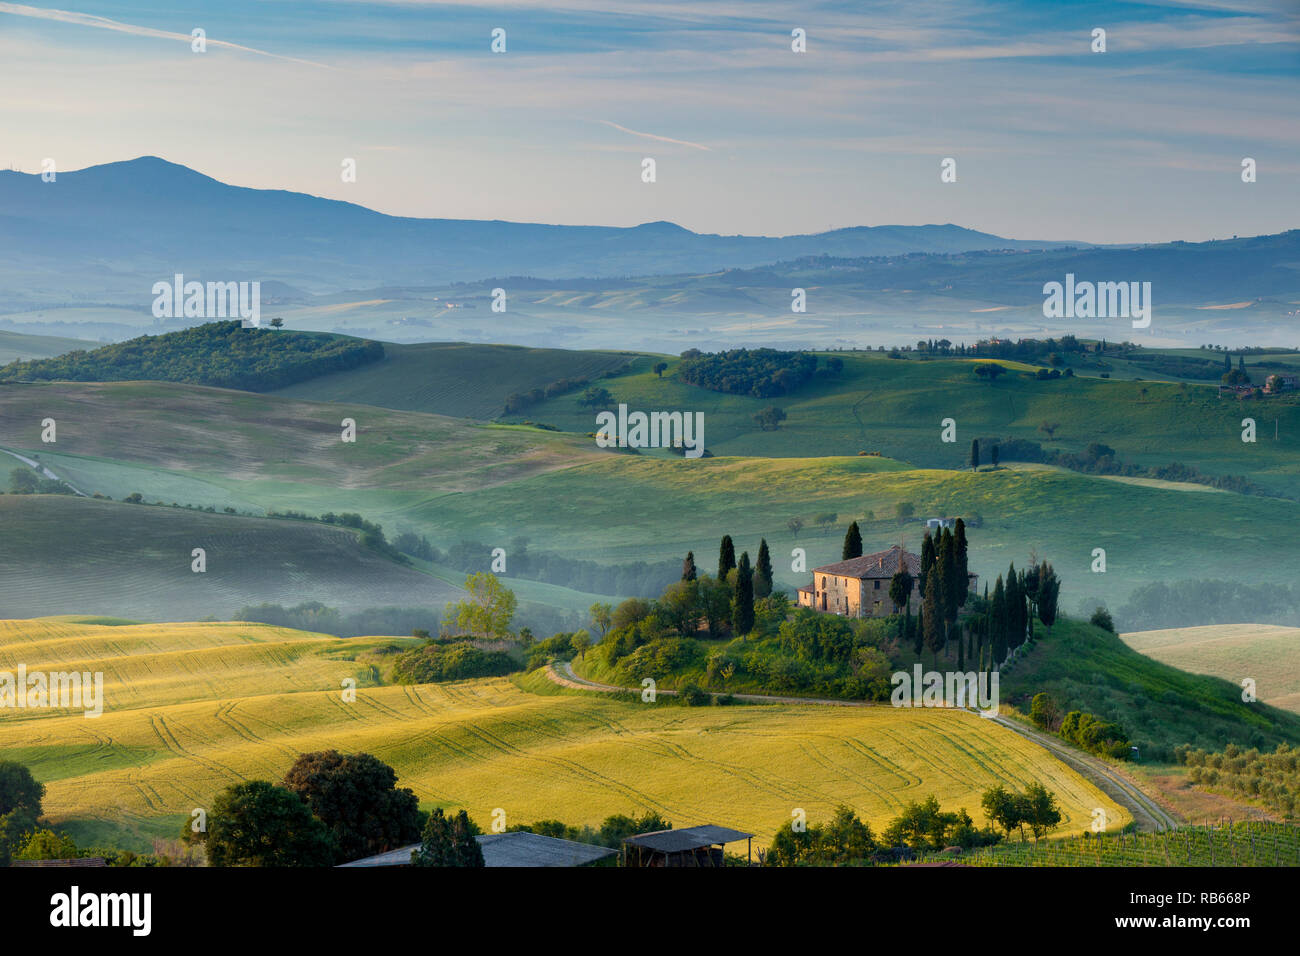 Dawn over Podere Belvedere and the Tuscan countryside near San Quirico d'Orcia, Tuscany, Italy Stock Photo